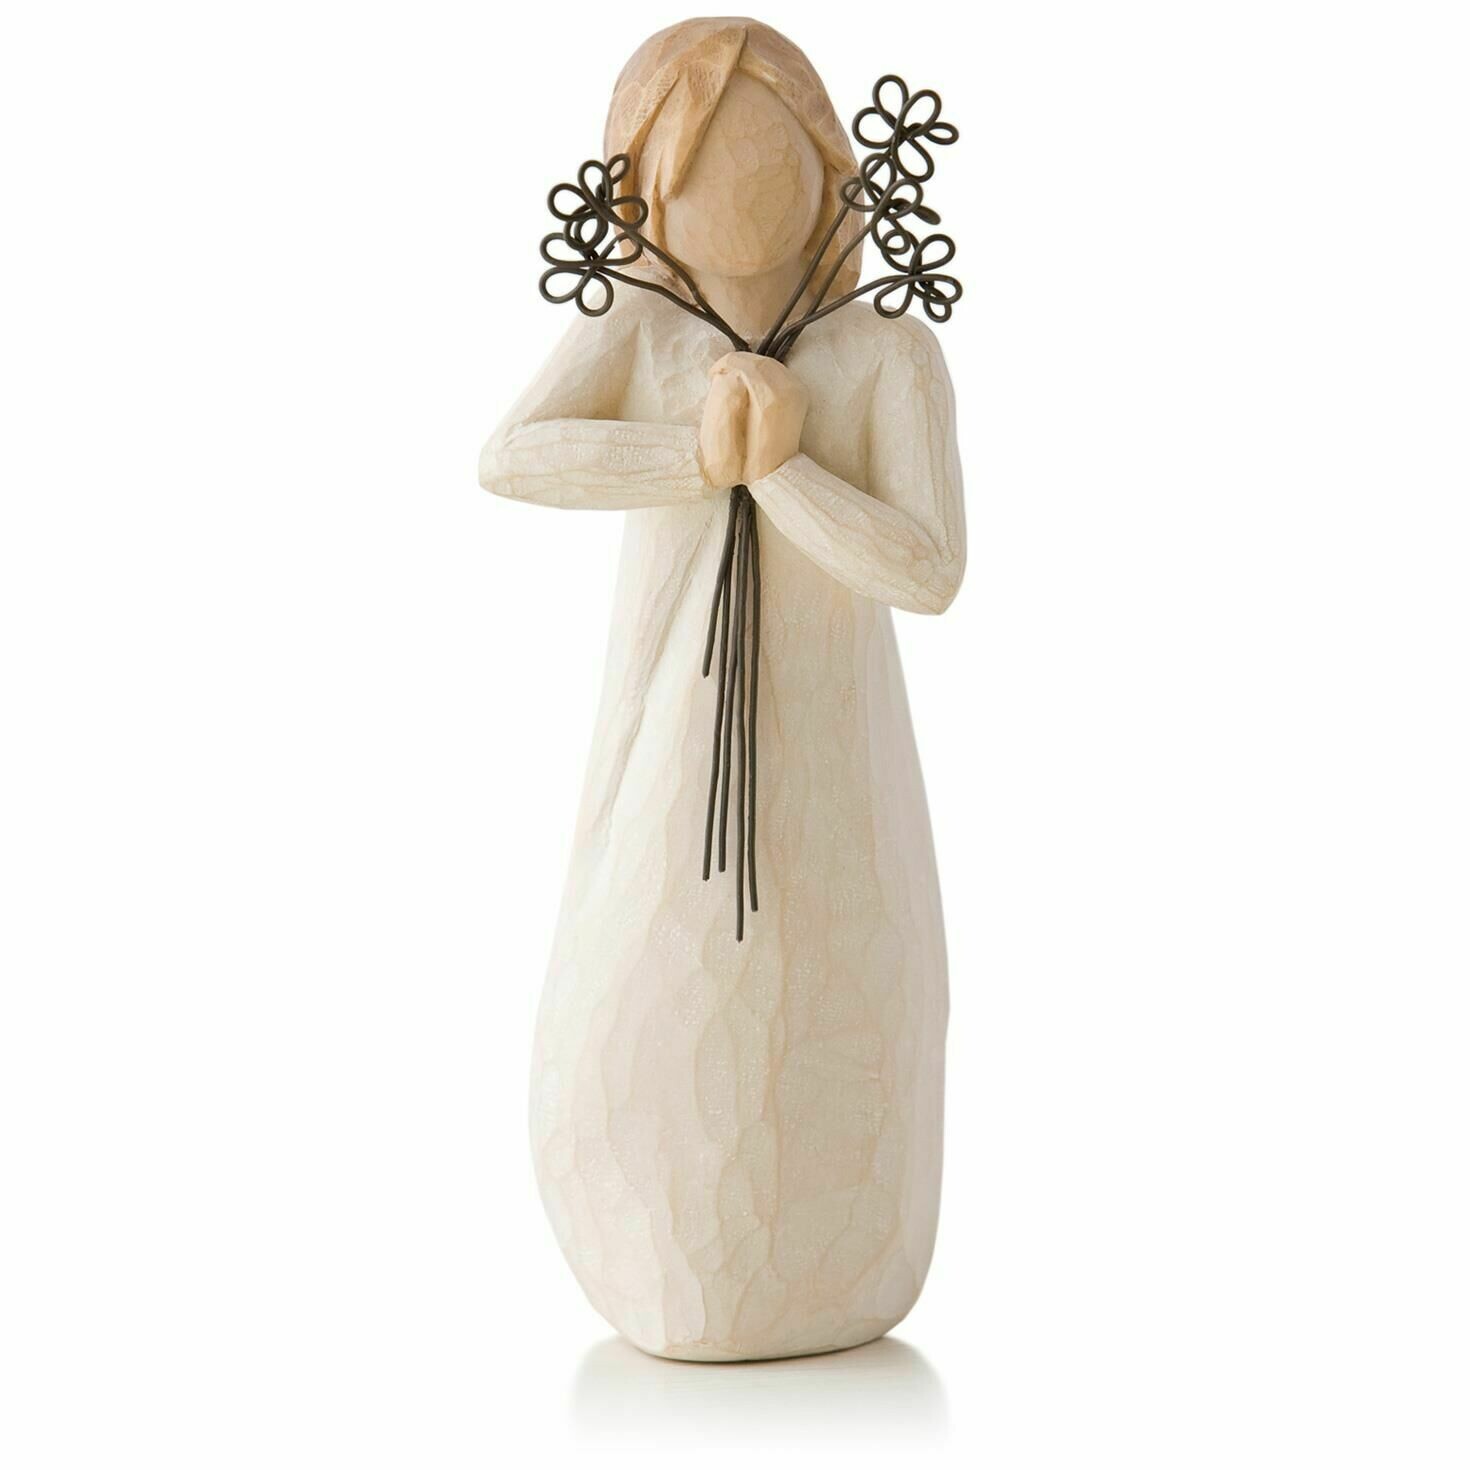 Willow Tree: Friendship - Girl holding Wire Flowers